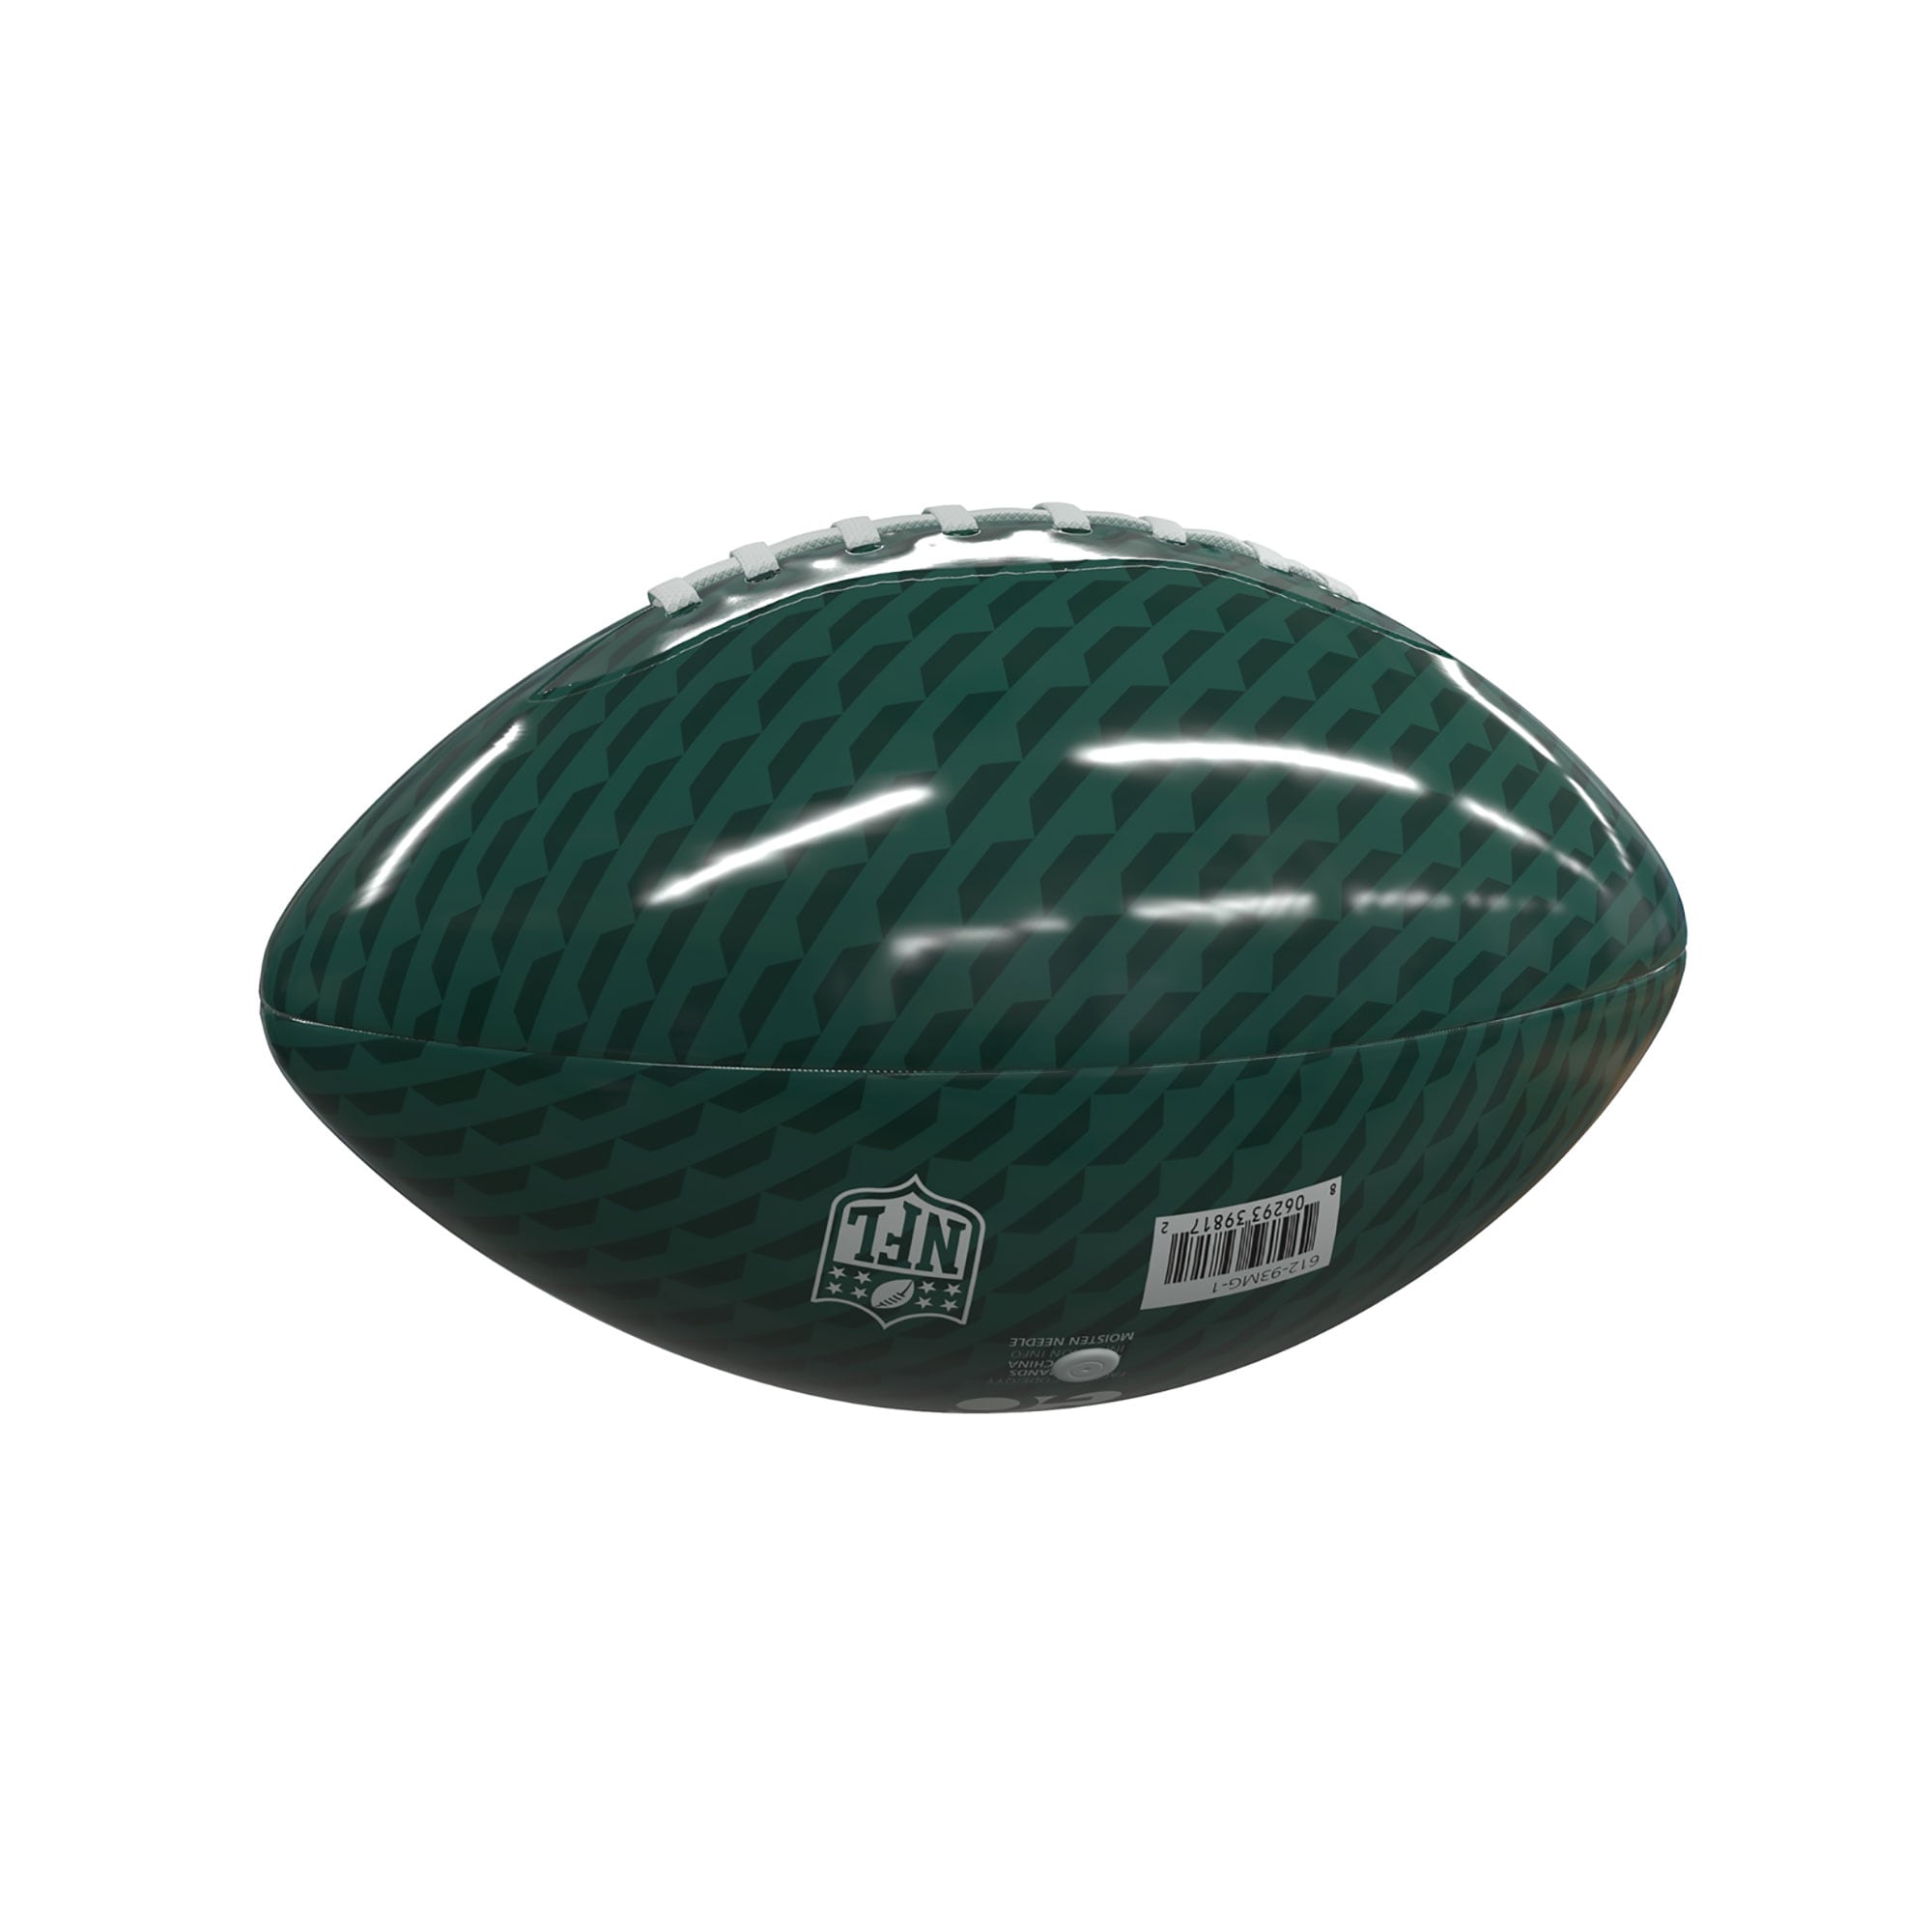 Green Bay Packers Rubber Glossy Mini Football - image 2 of 2